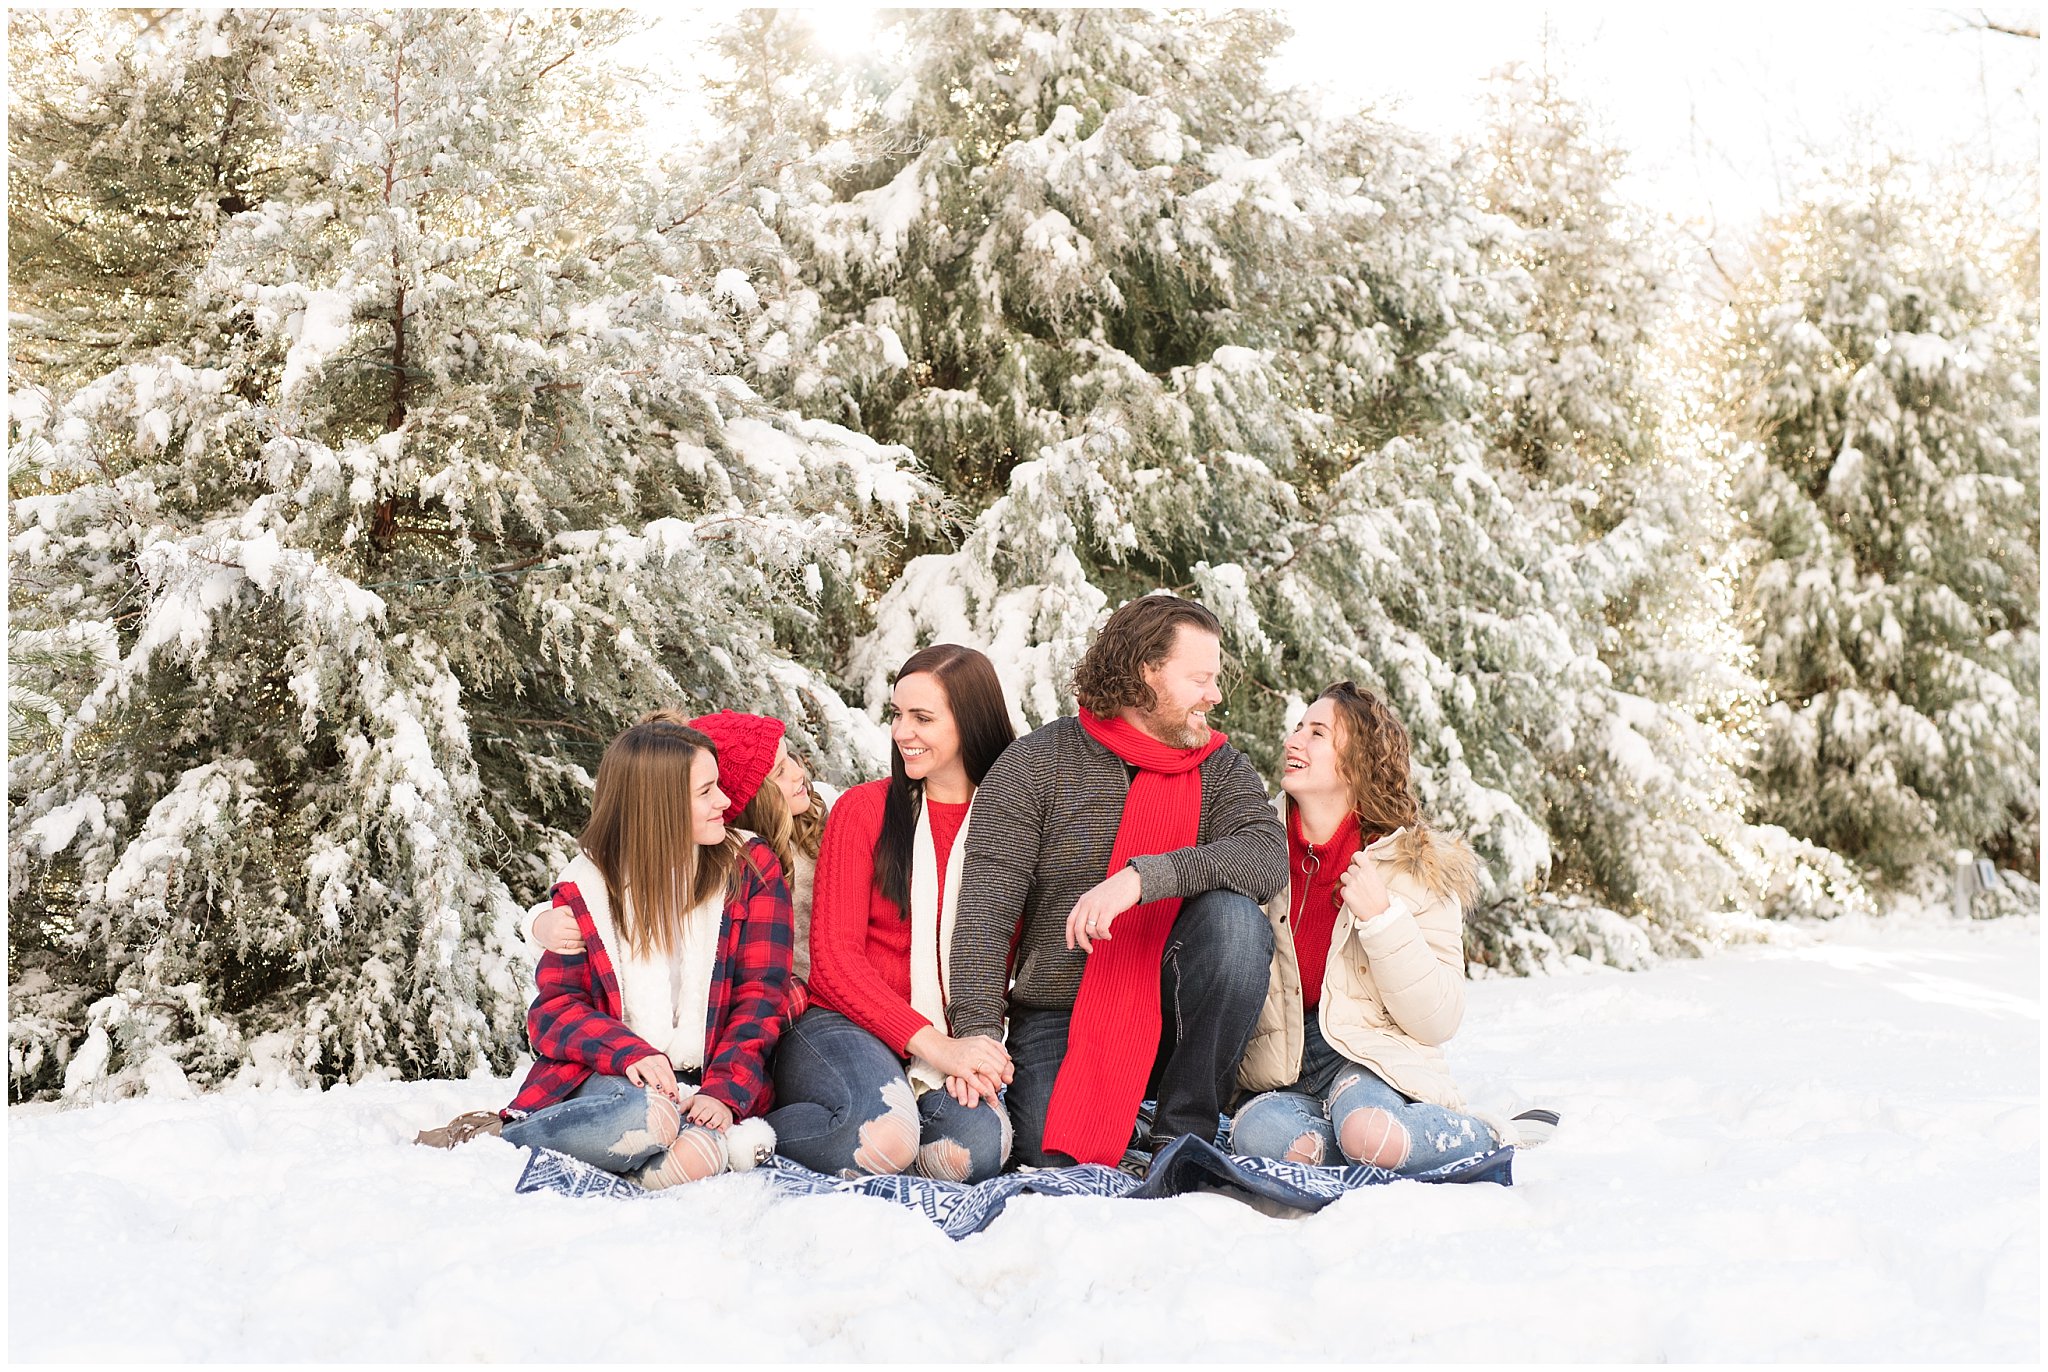 Family looking and laughing in the snow in front of Christmas trees | Utah Family Christmas Photoshoot | Oak Hills Reception and Event | Jessie and Dallin Photography